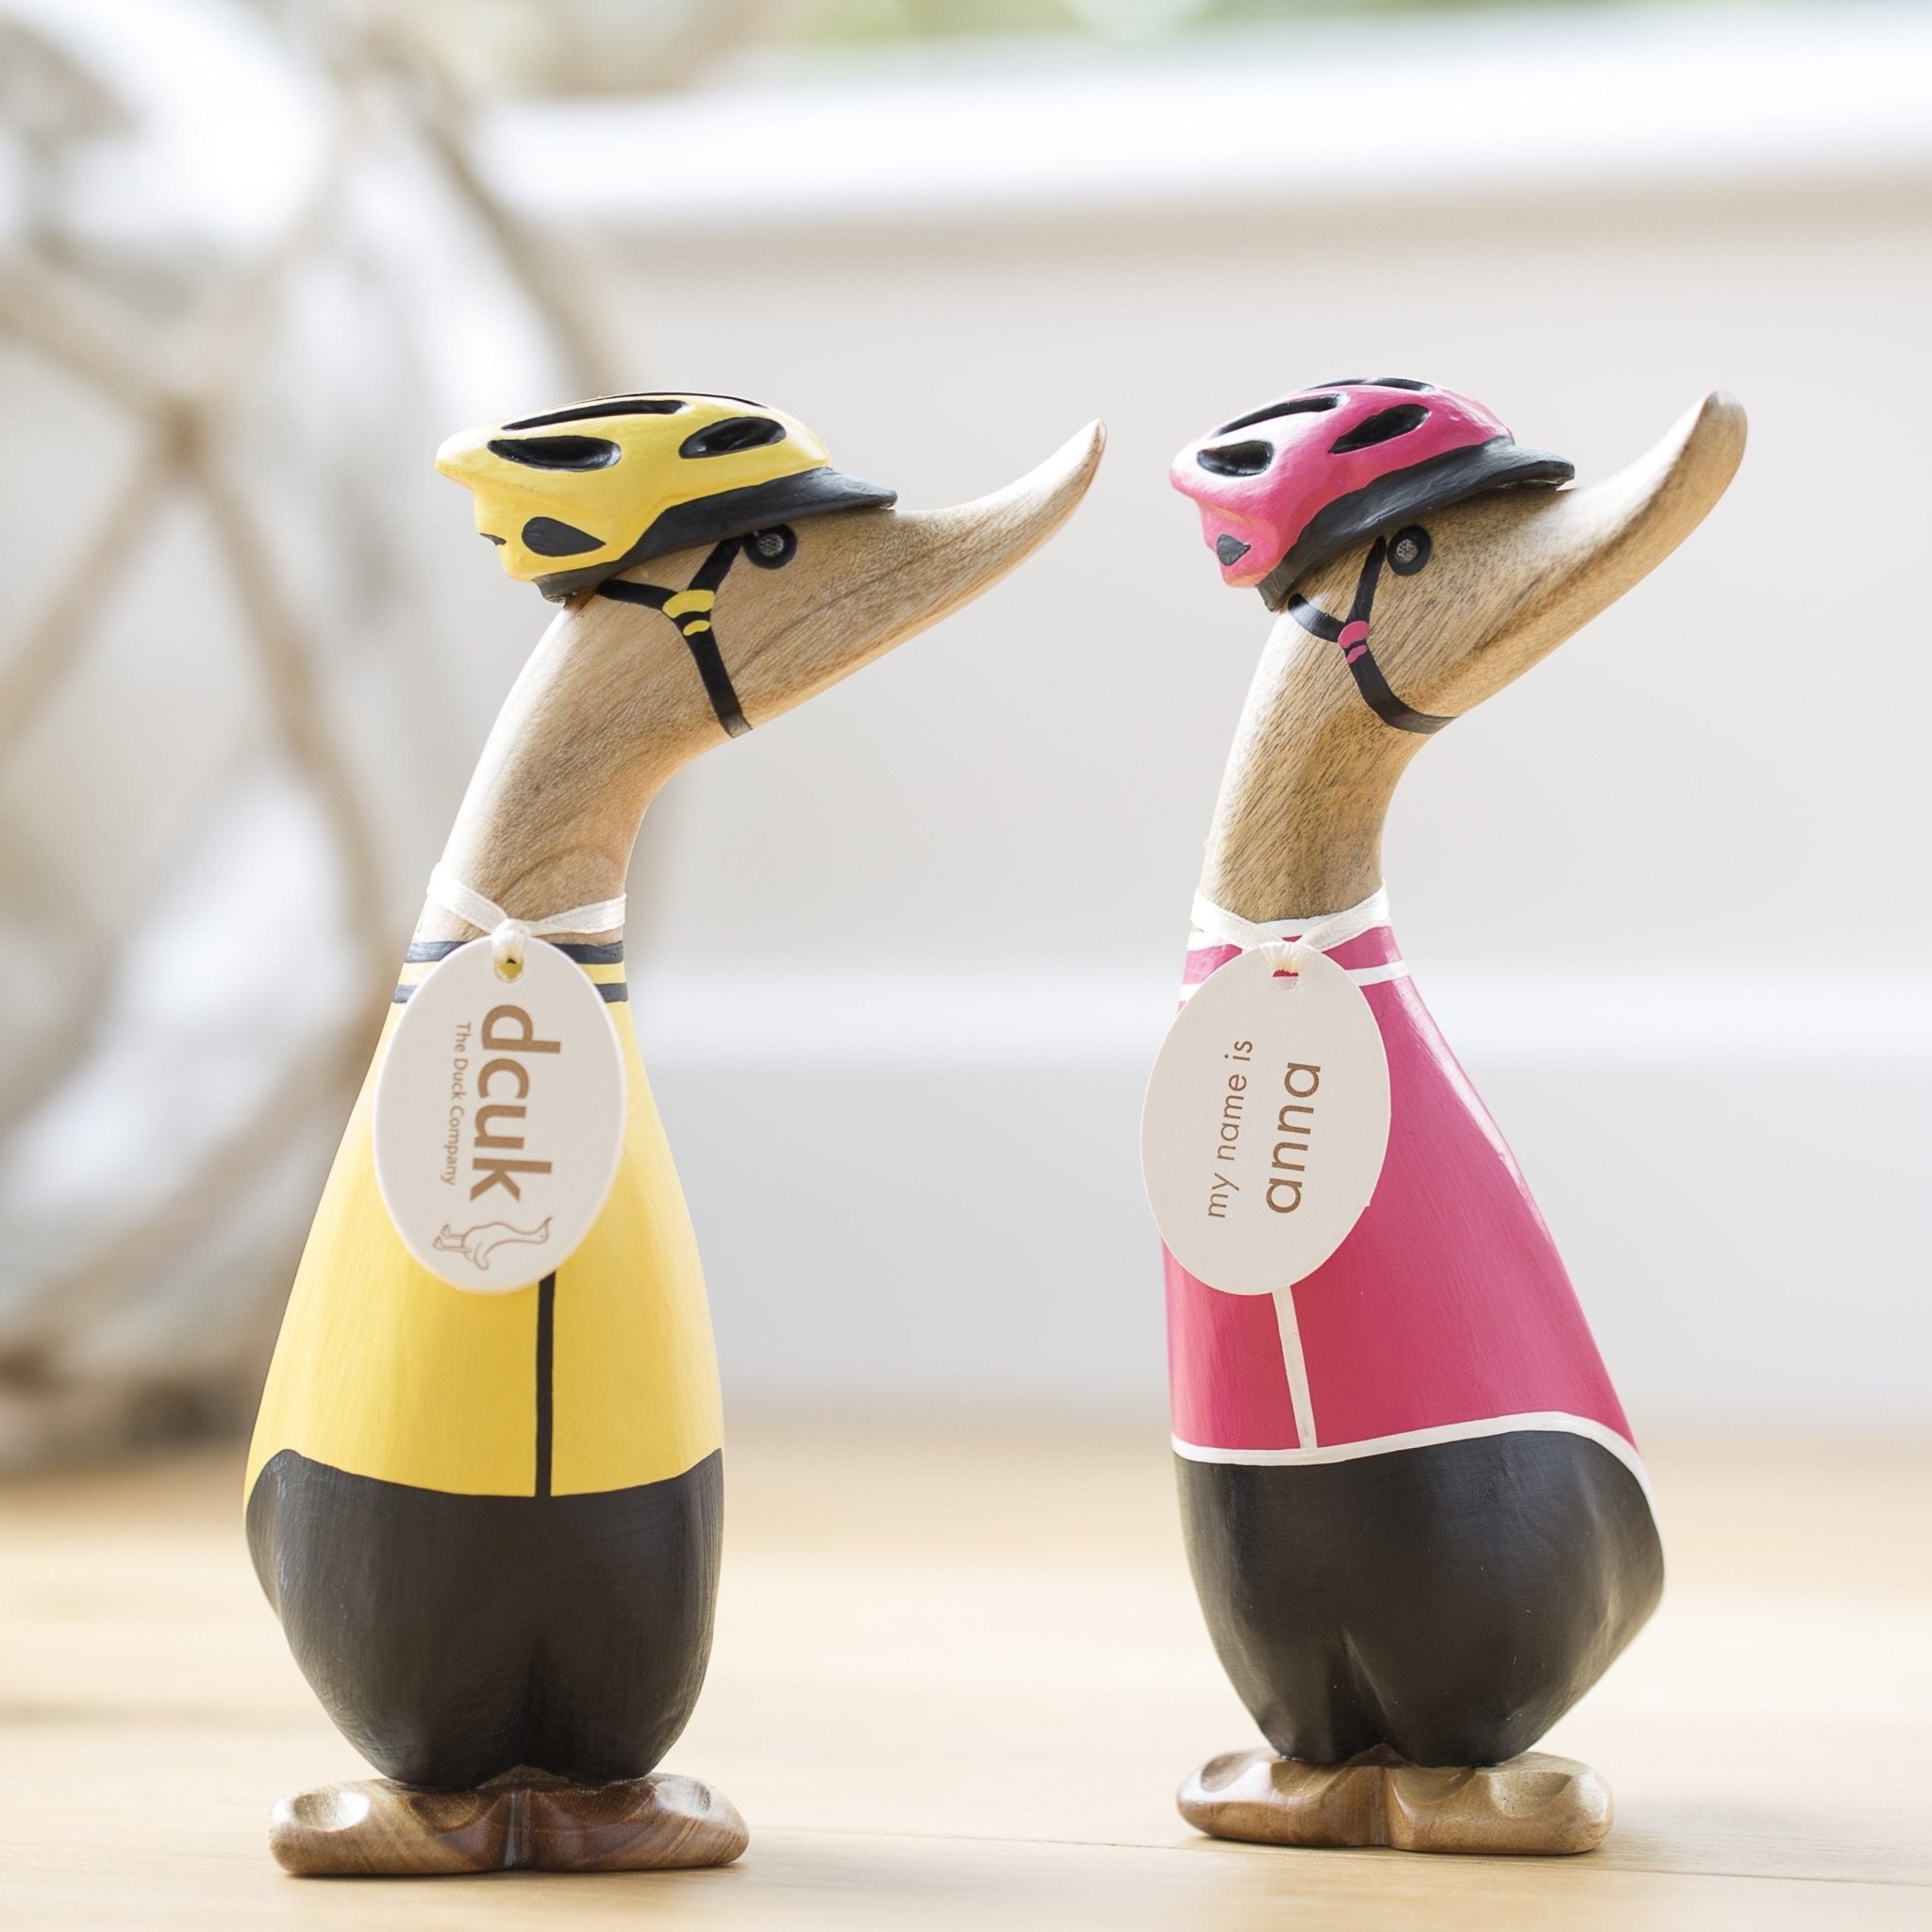 Cyclist Wooden Duckling in Pink Jersey - Duck Barn Interiors